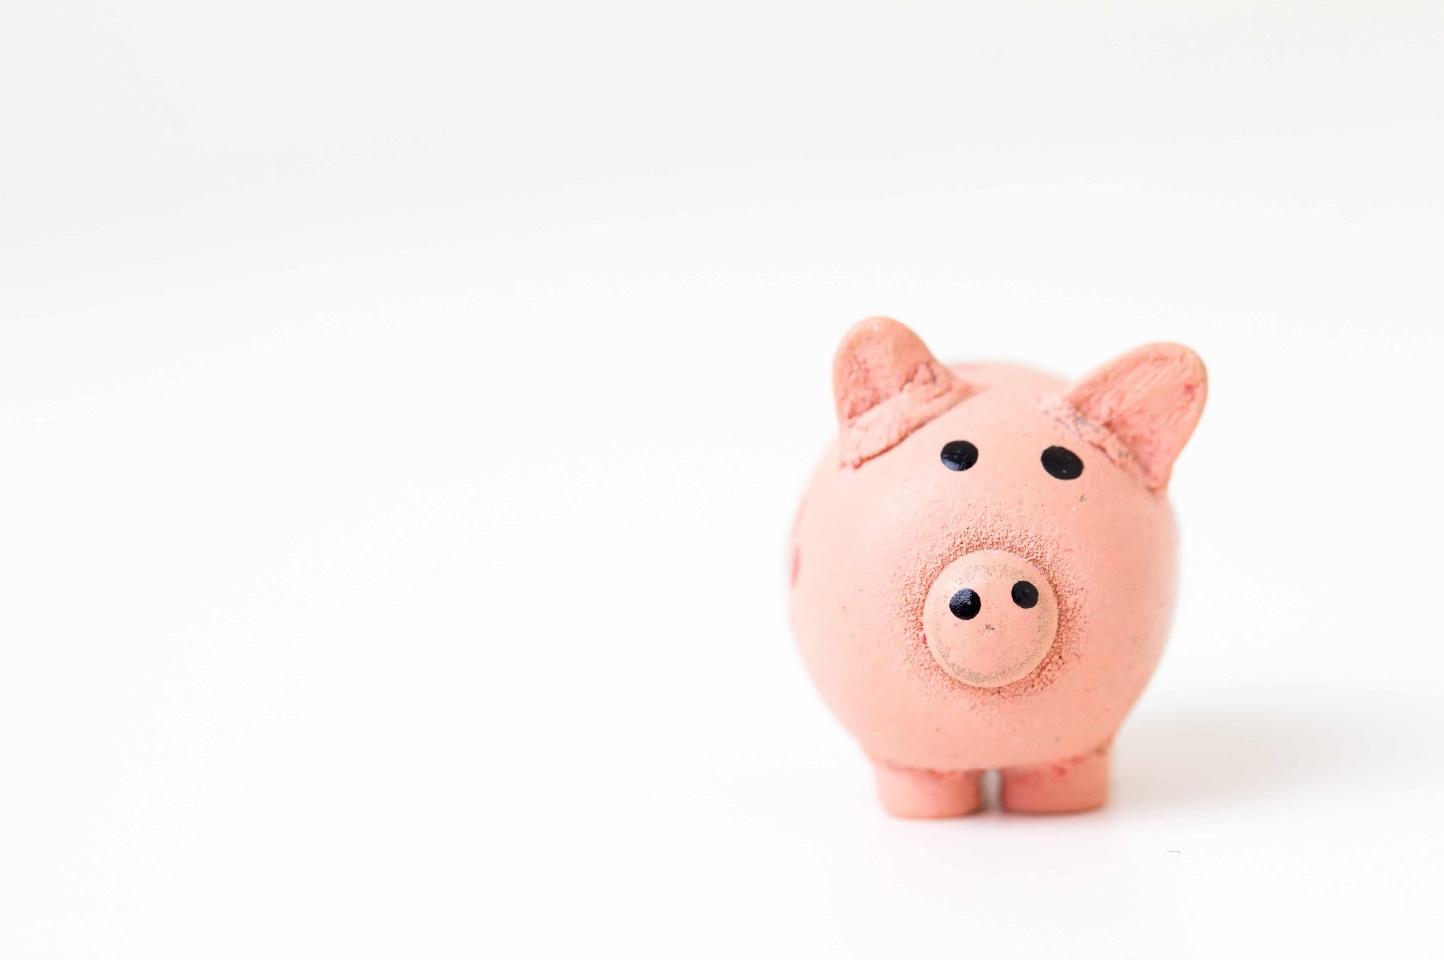 A cloth pink piggy bank on a white background.